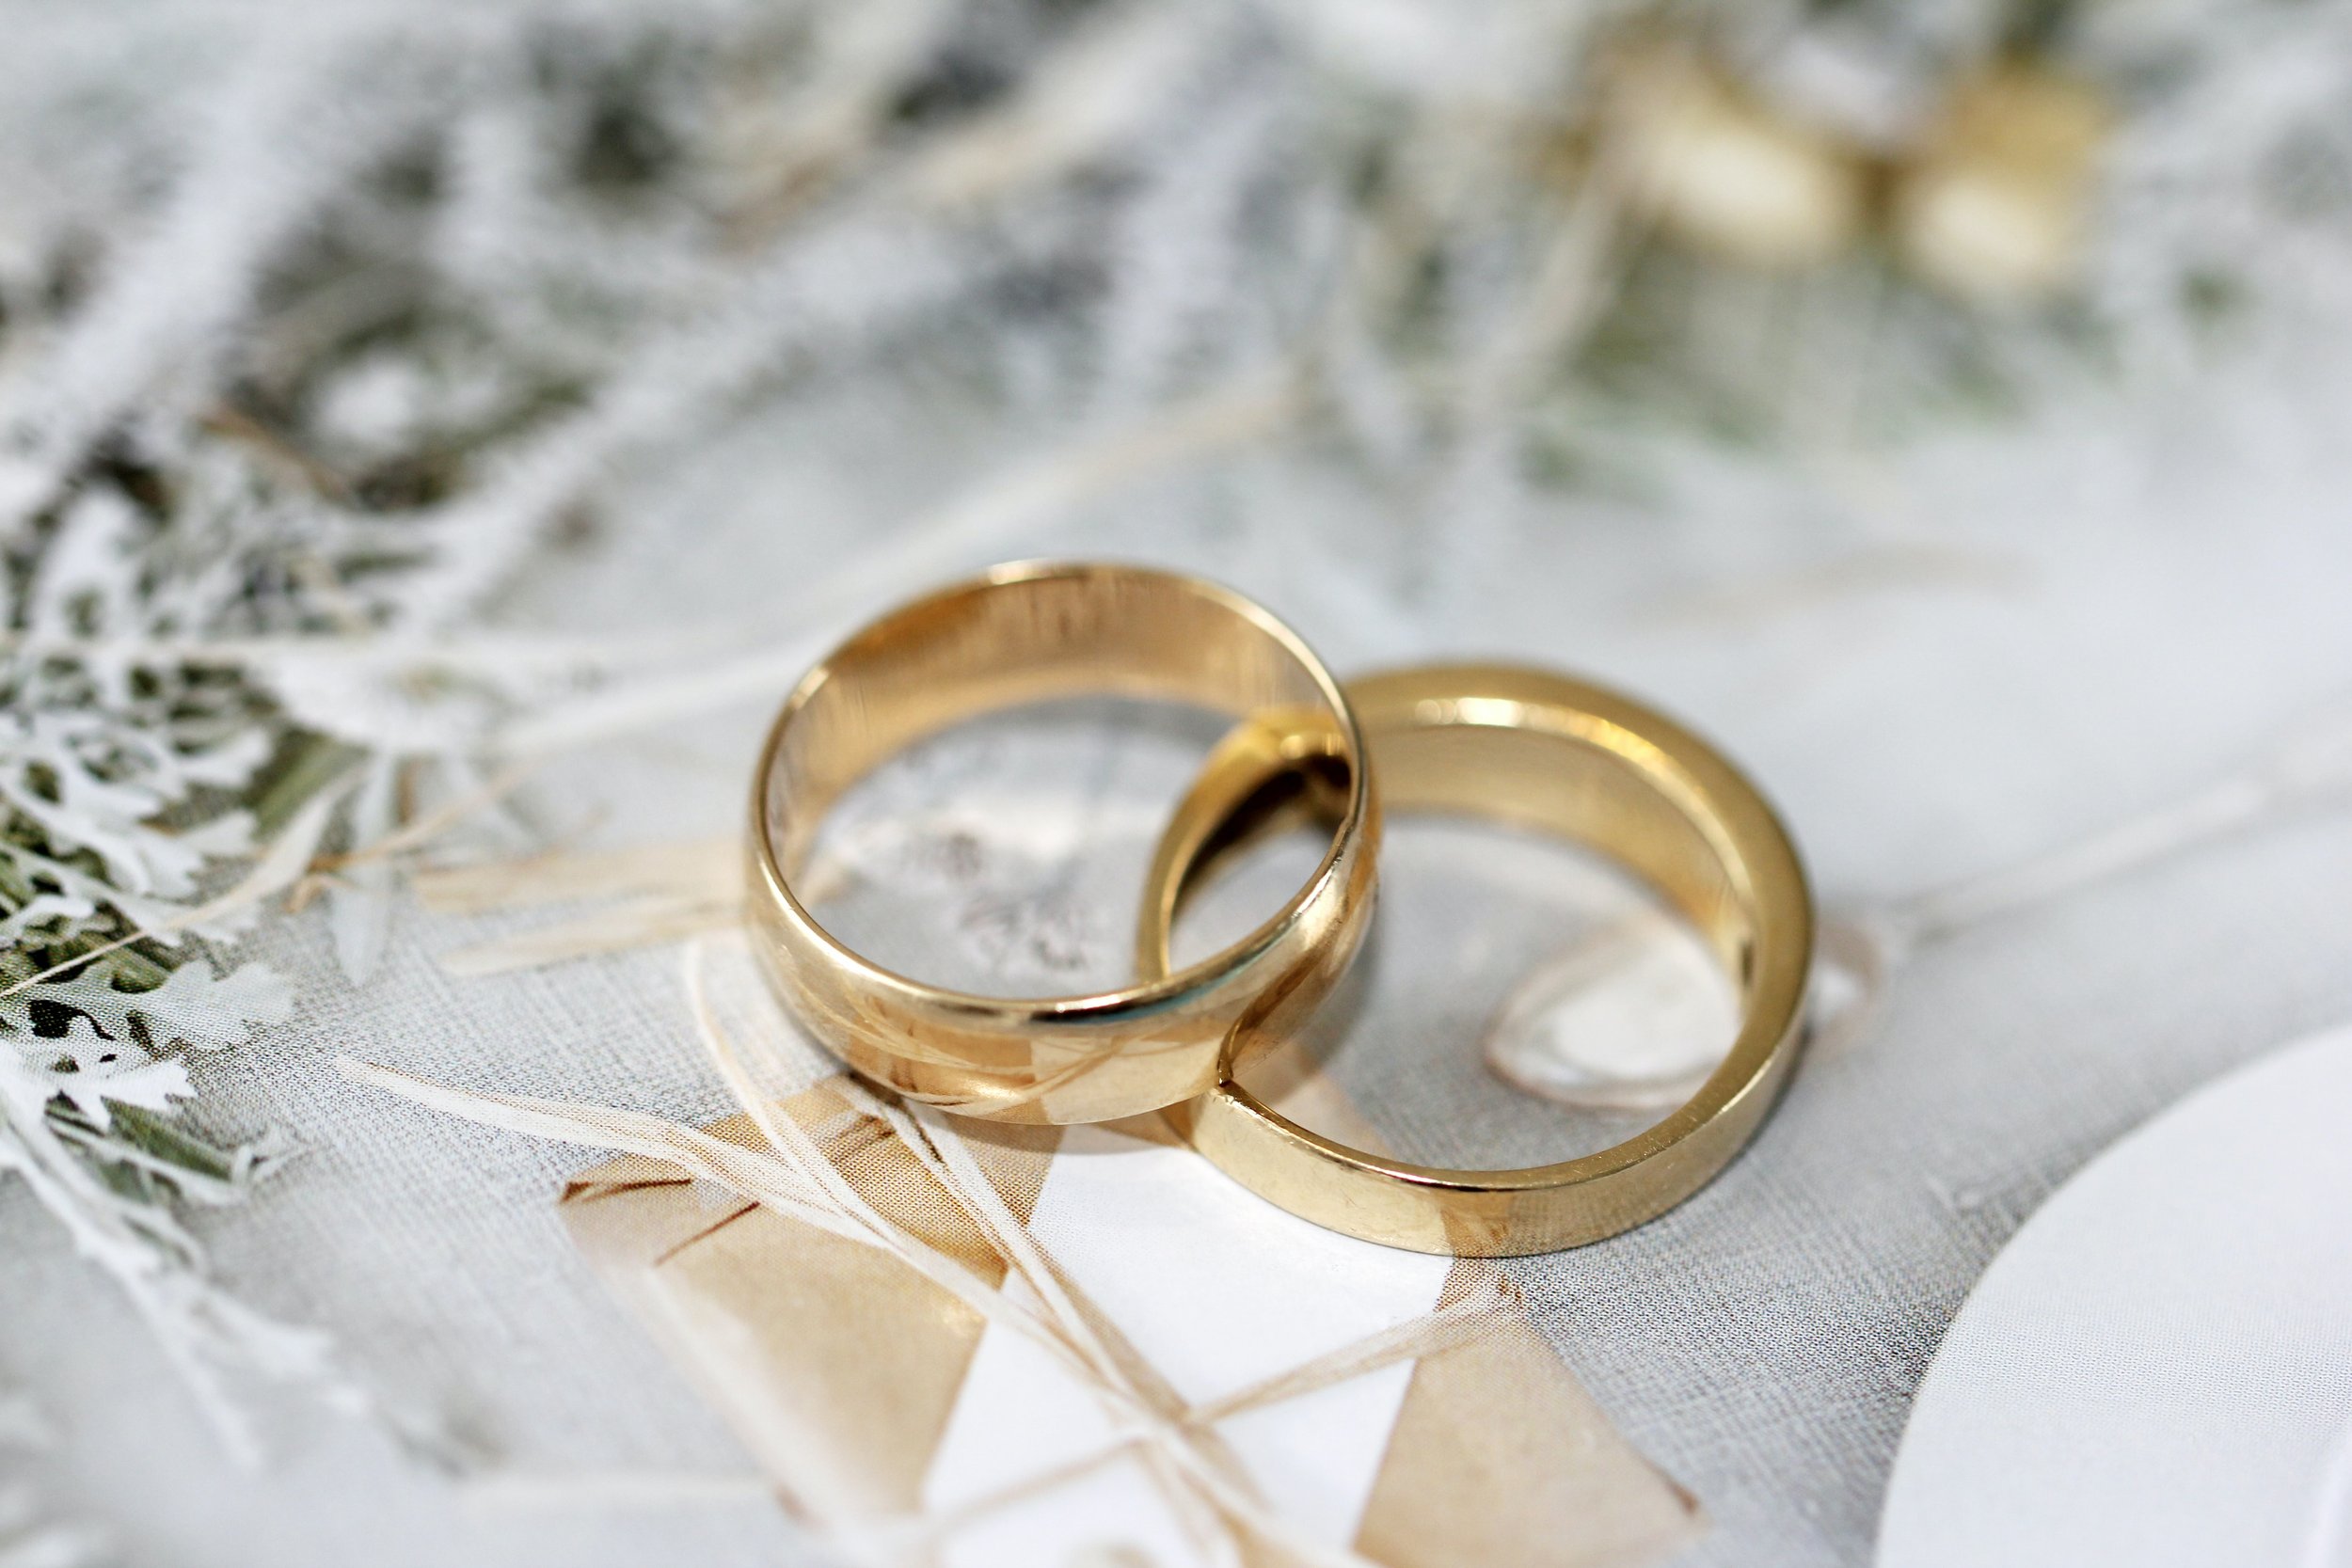 Want to stay married? Have a cheap wedding